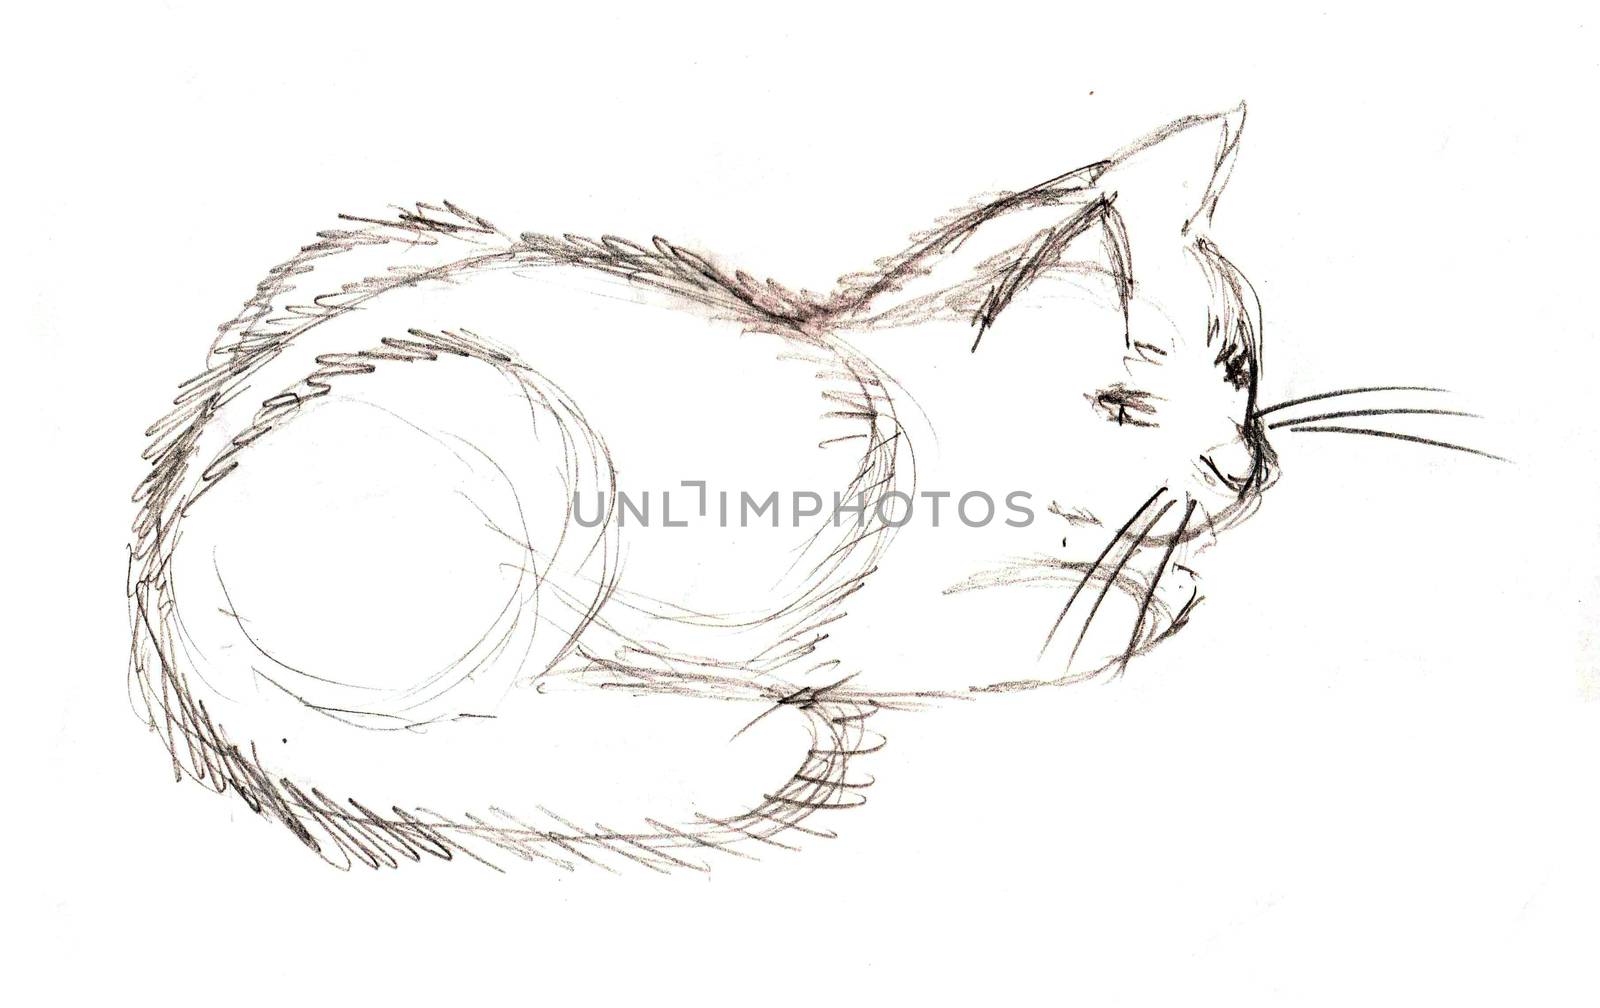 Black and white isolated cat sketch illustration on white background. A lies cat that is drawn with a simple pencil.